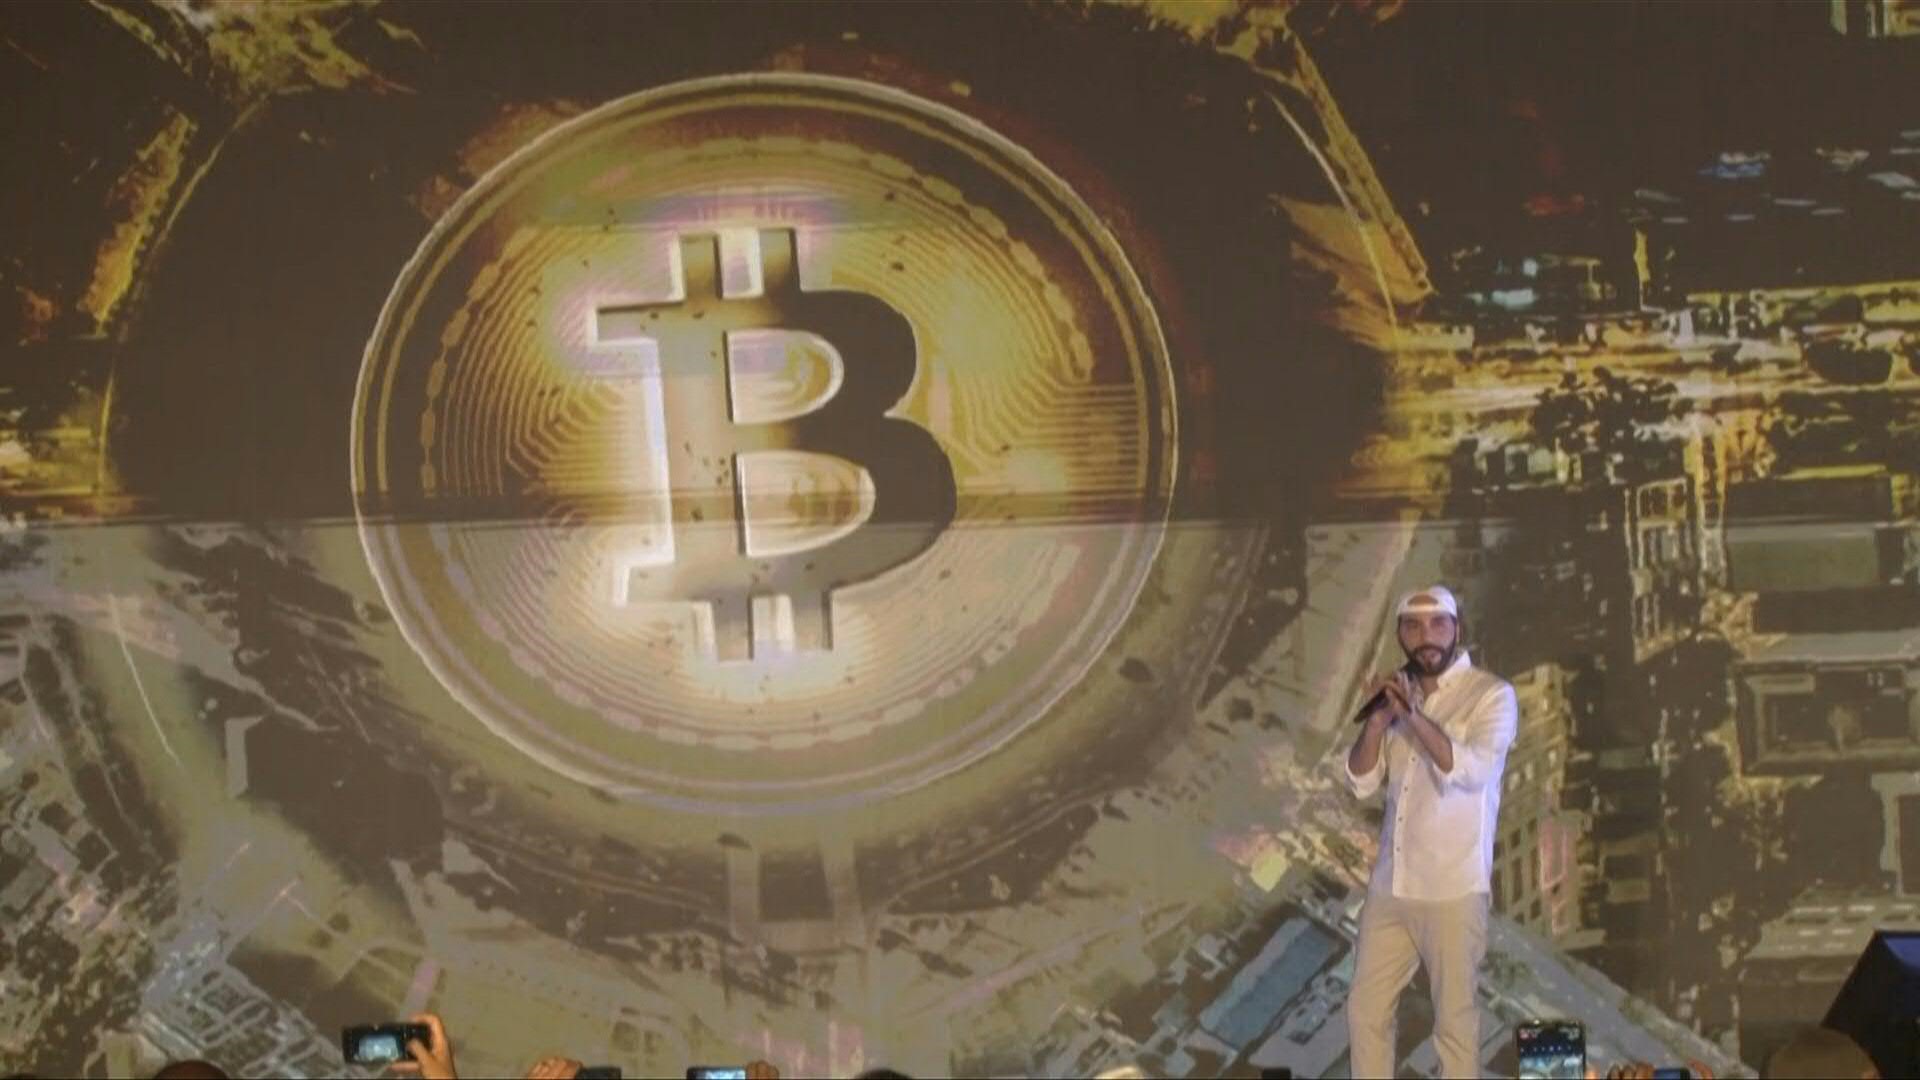 El Salvador acquired 500 bitcoins for $15.3 million, taking advantage of the falling price of the cryptocurrency that is legal tender in the country, President Nayib Bukele announced on Monday.